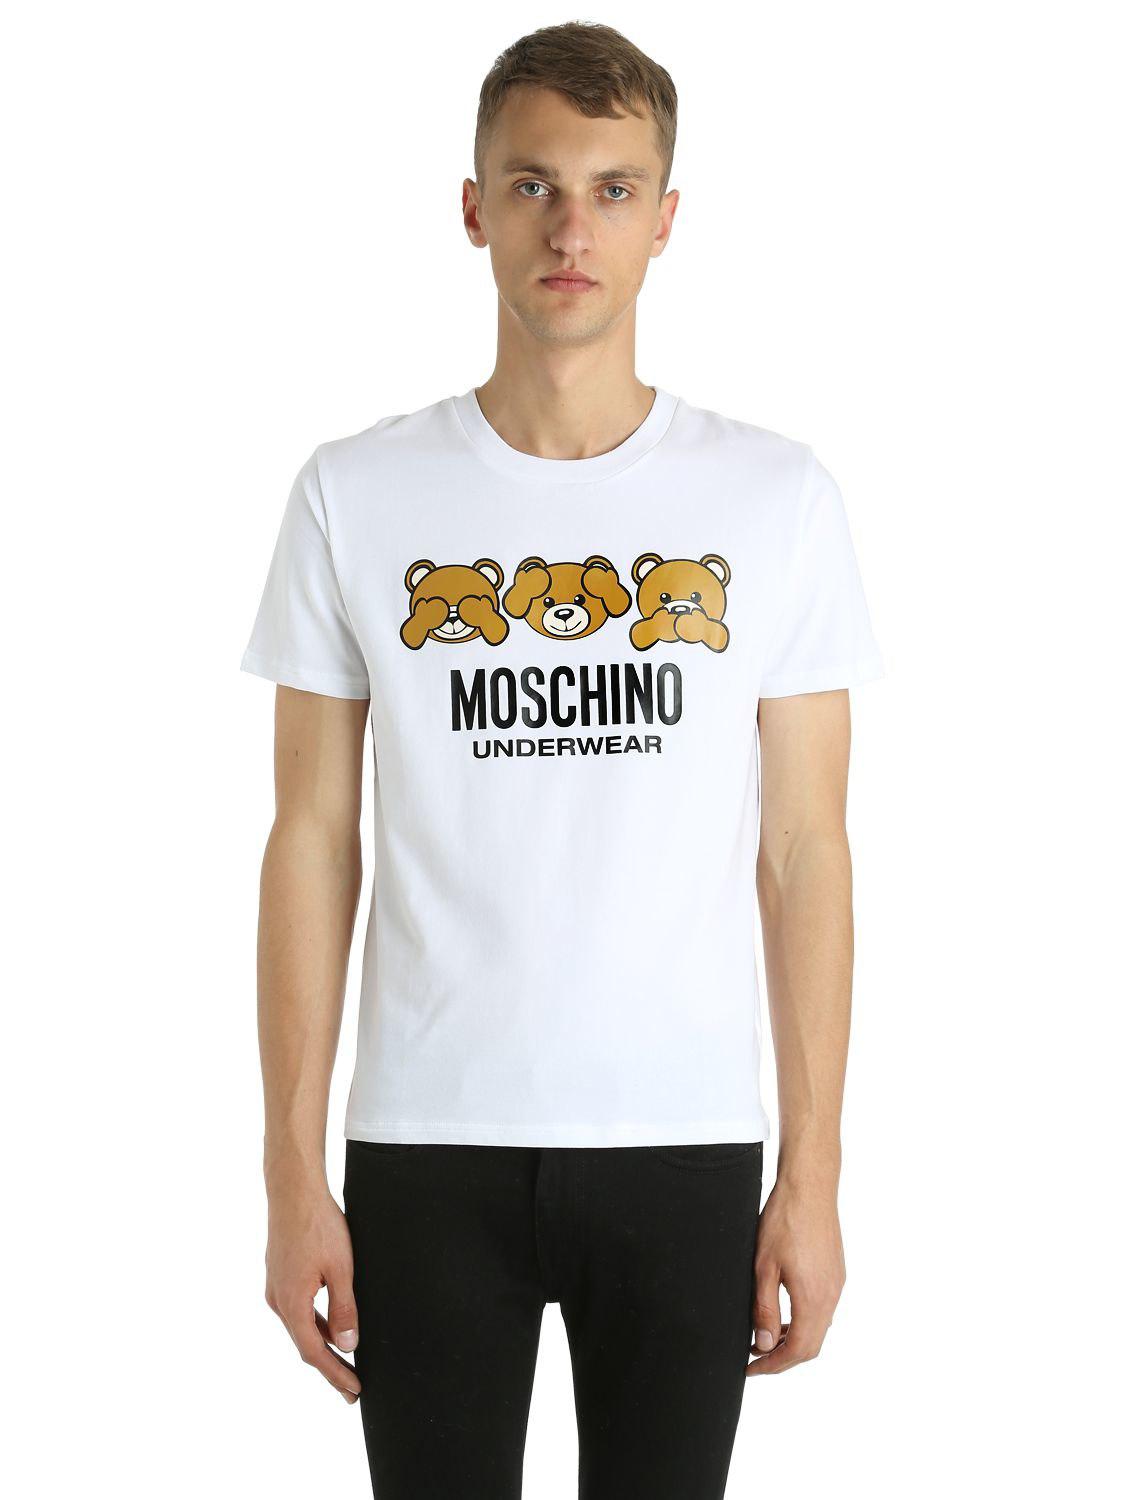 Lyst - Moschino Underbear Stretch Cotton Jersey T-shirt in White for Men